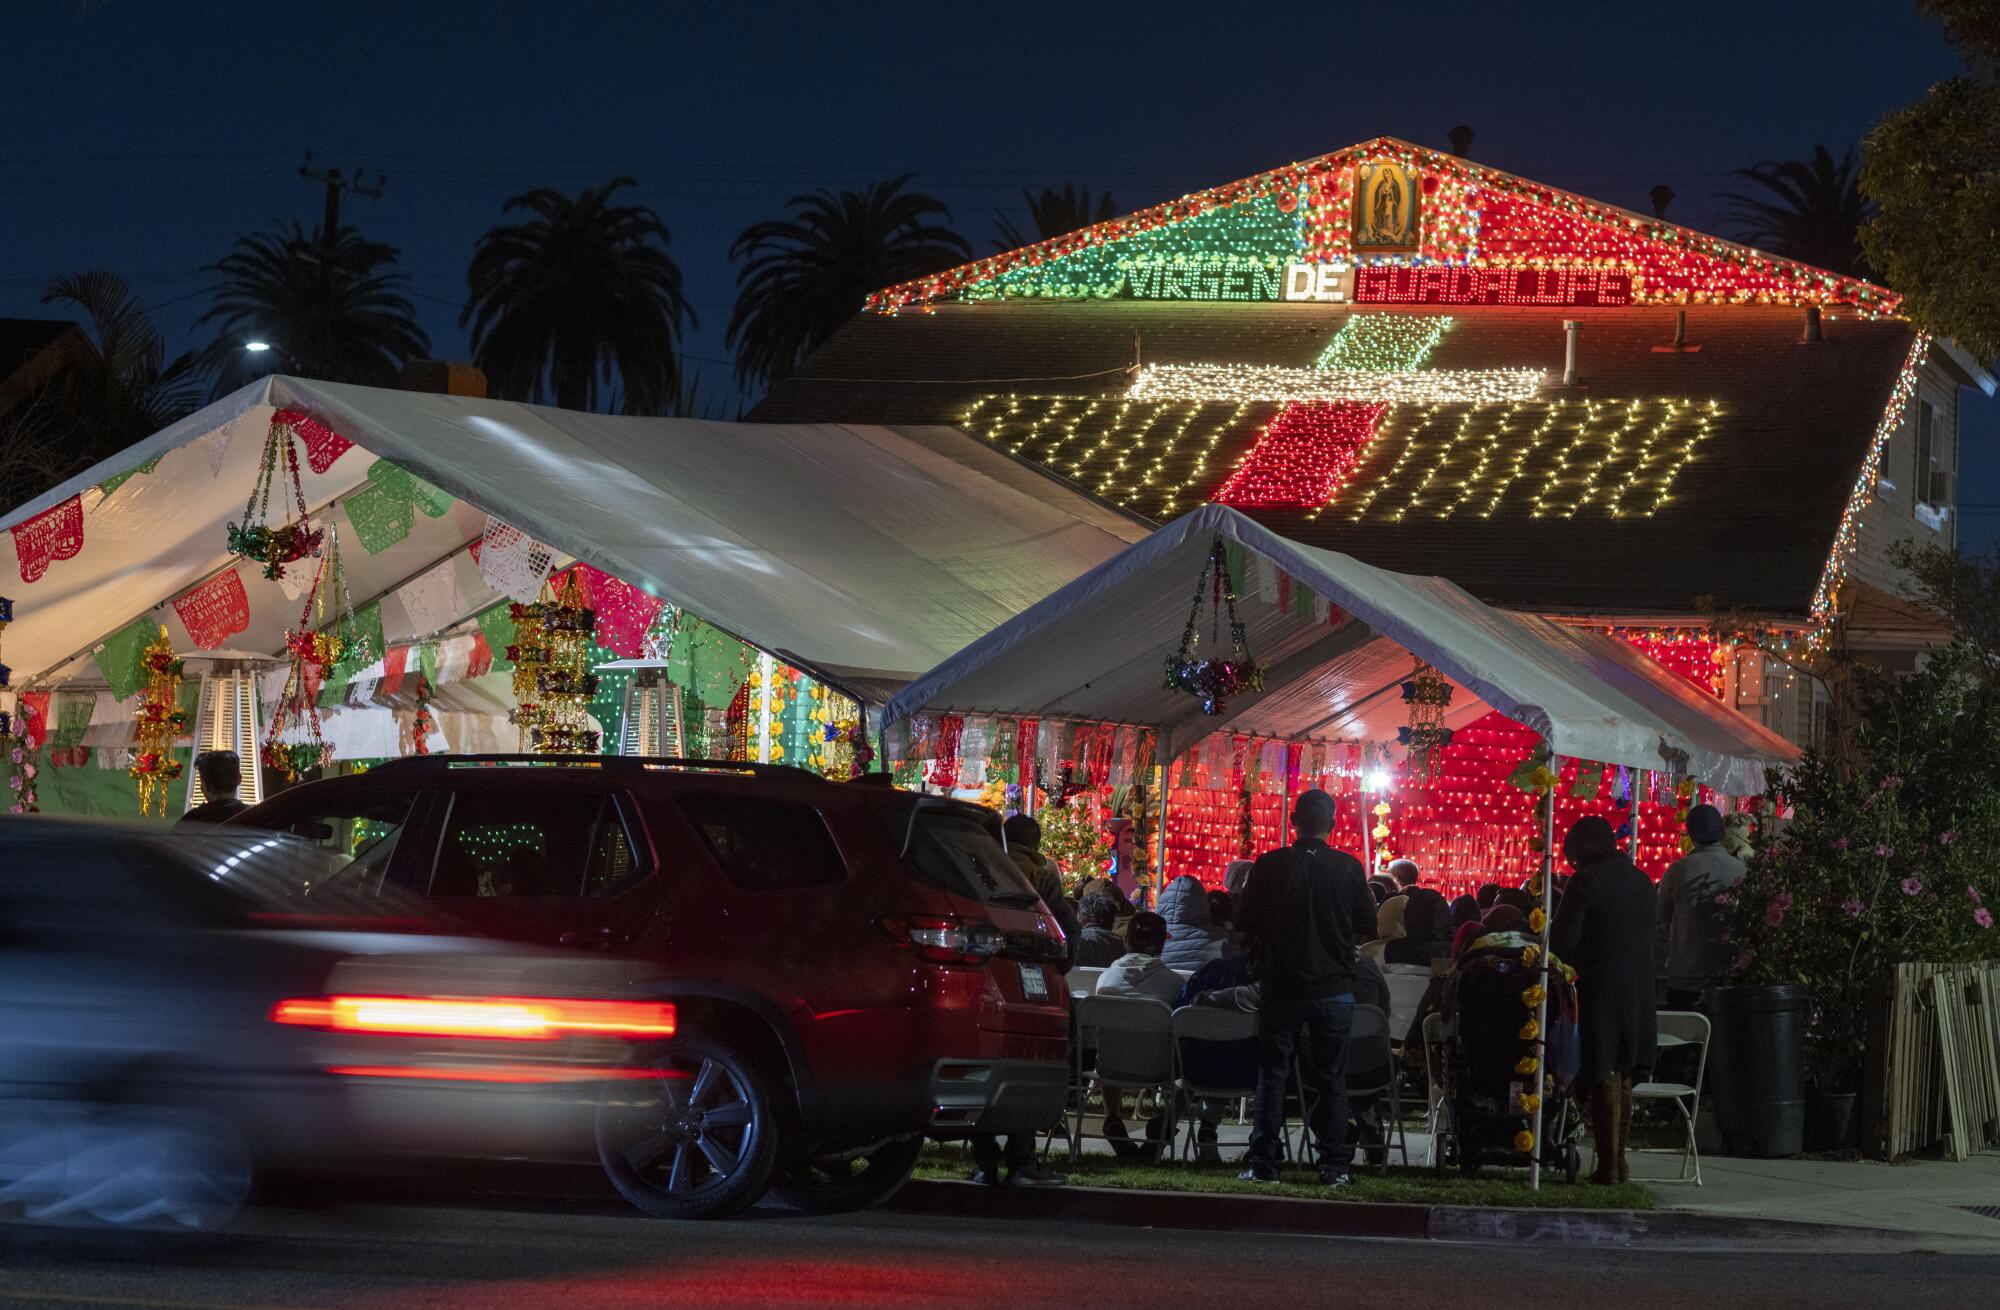 A home adorned with light has become a popular shrine in honor of the Virgen de Guadalupe